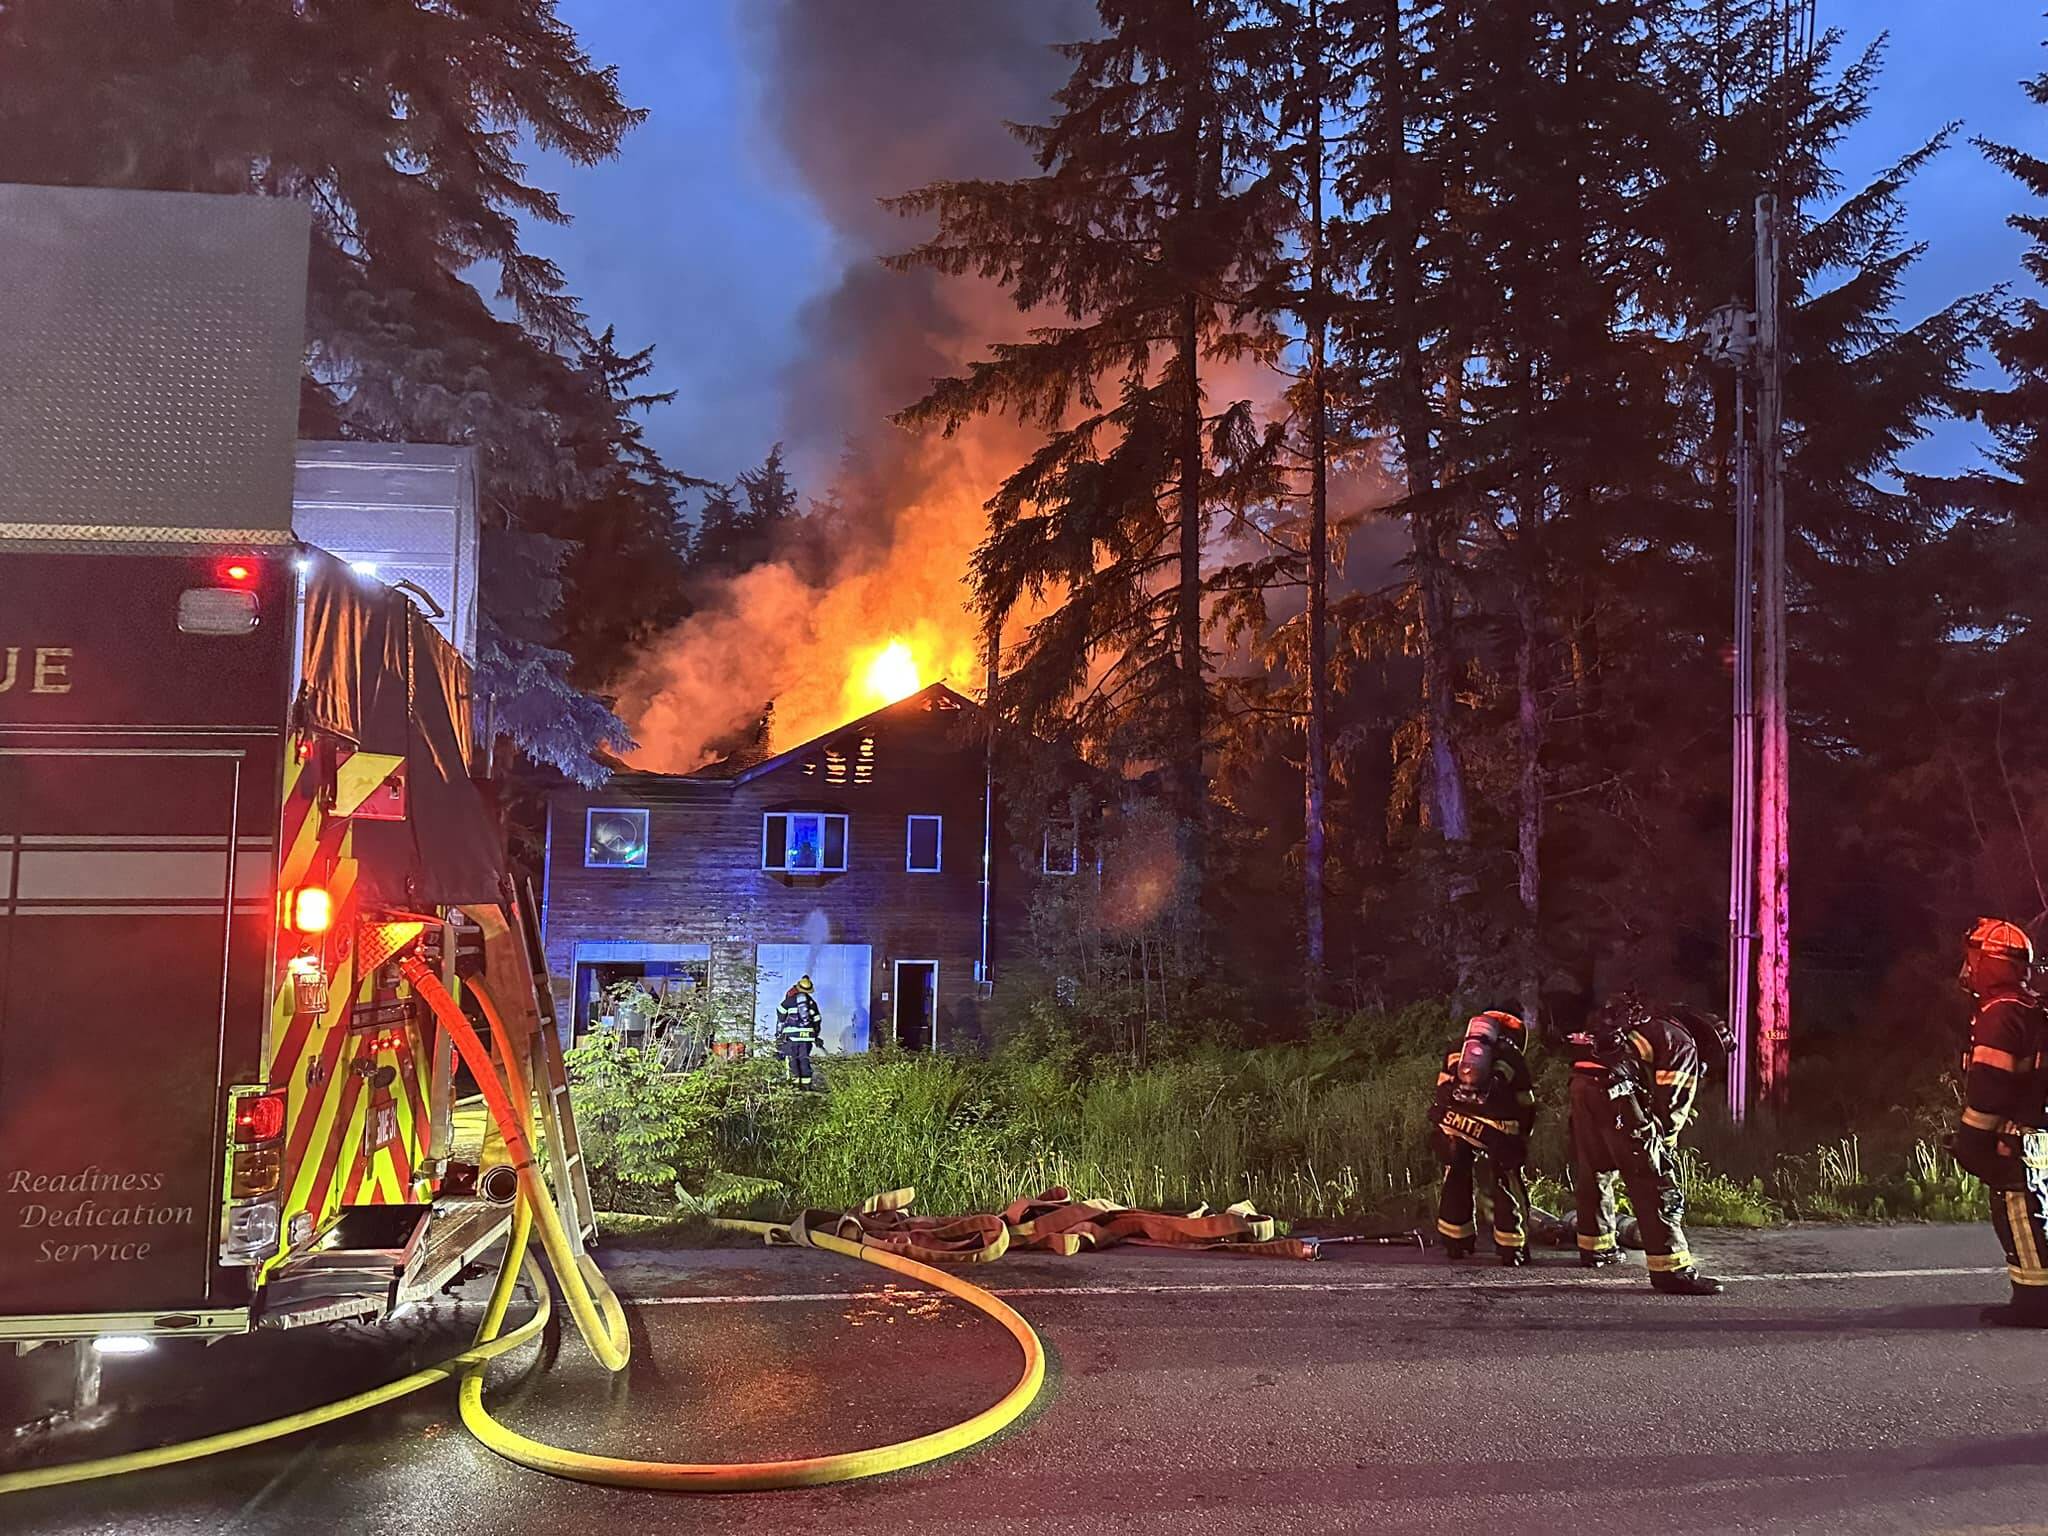 Capital City Fire/ Rescue respond to a structure fire Tuesday morning in the Fritz Cove area near Fox Farm Trail. No injuries were reported. (CCFR)